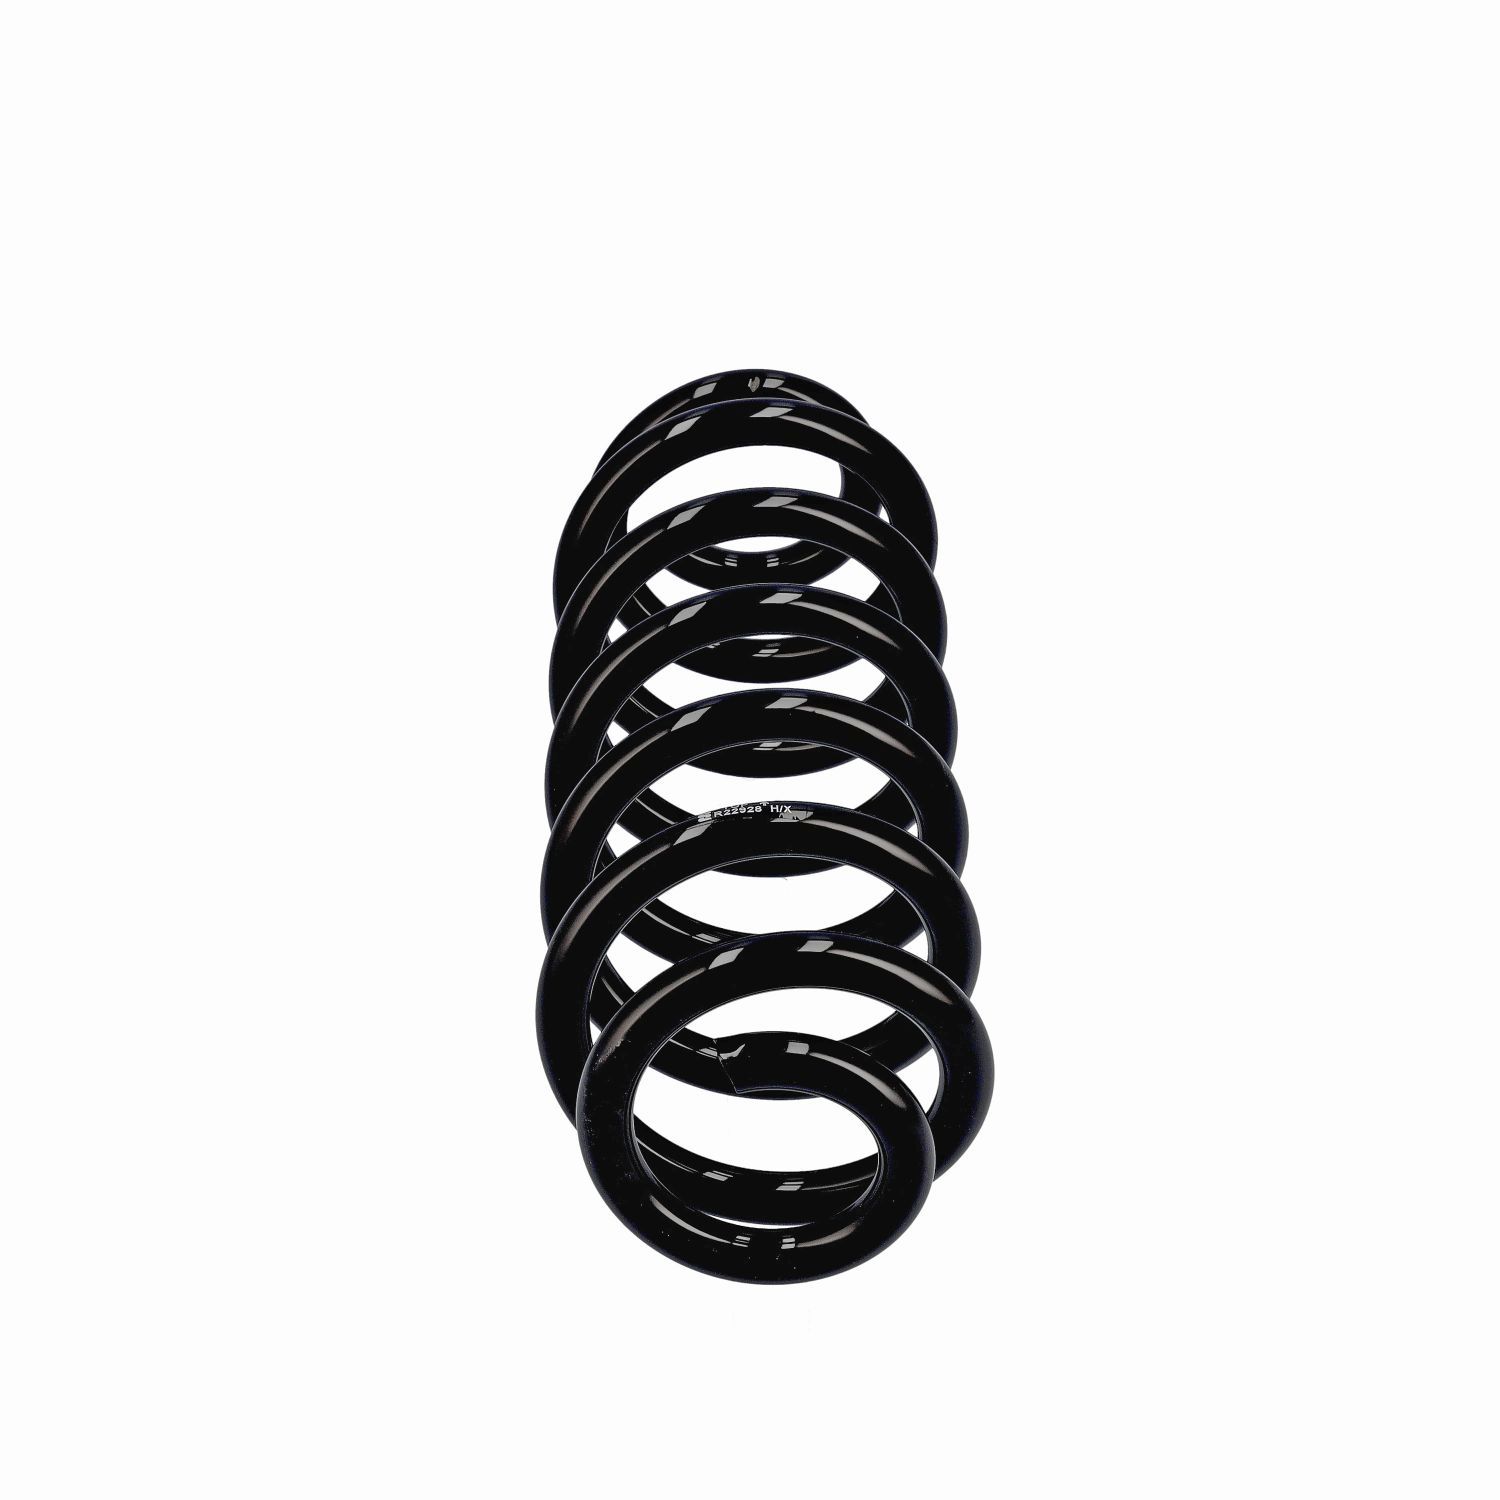 EIBACH Springs rear and front VW Touran (5T1) new R22928